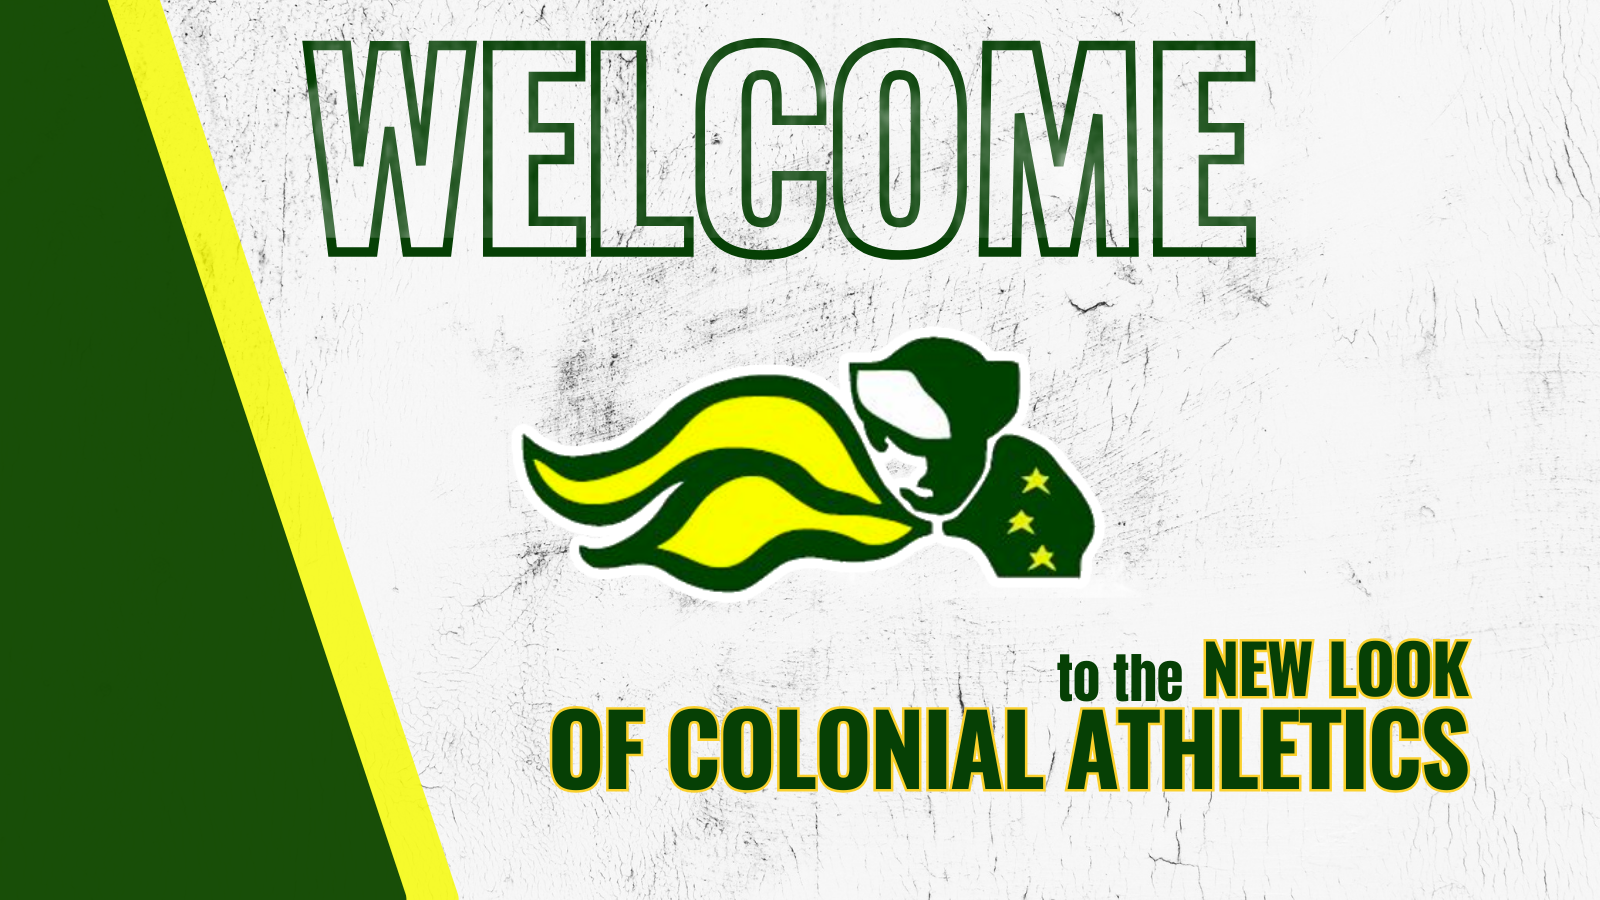 1710192715_CopyofOleyValleyWelcometo1280x320pxTwitterPost12.png - Image for 🎉 Exciting News for Colonial Athletics Fans! 🎉